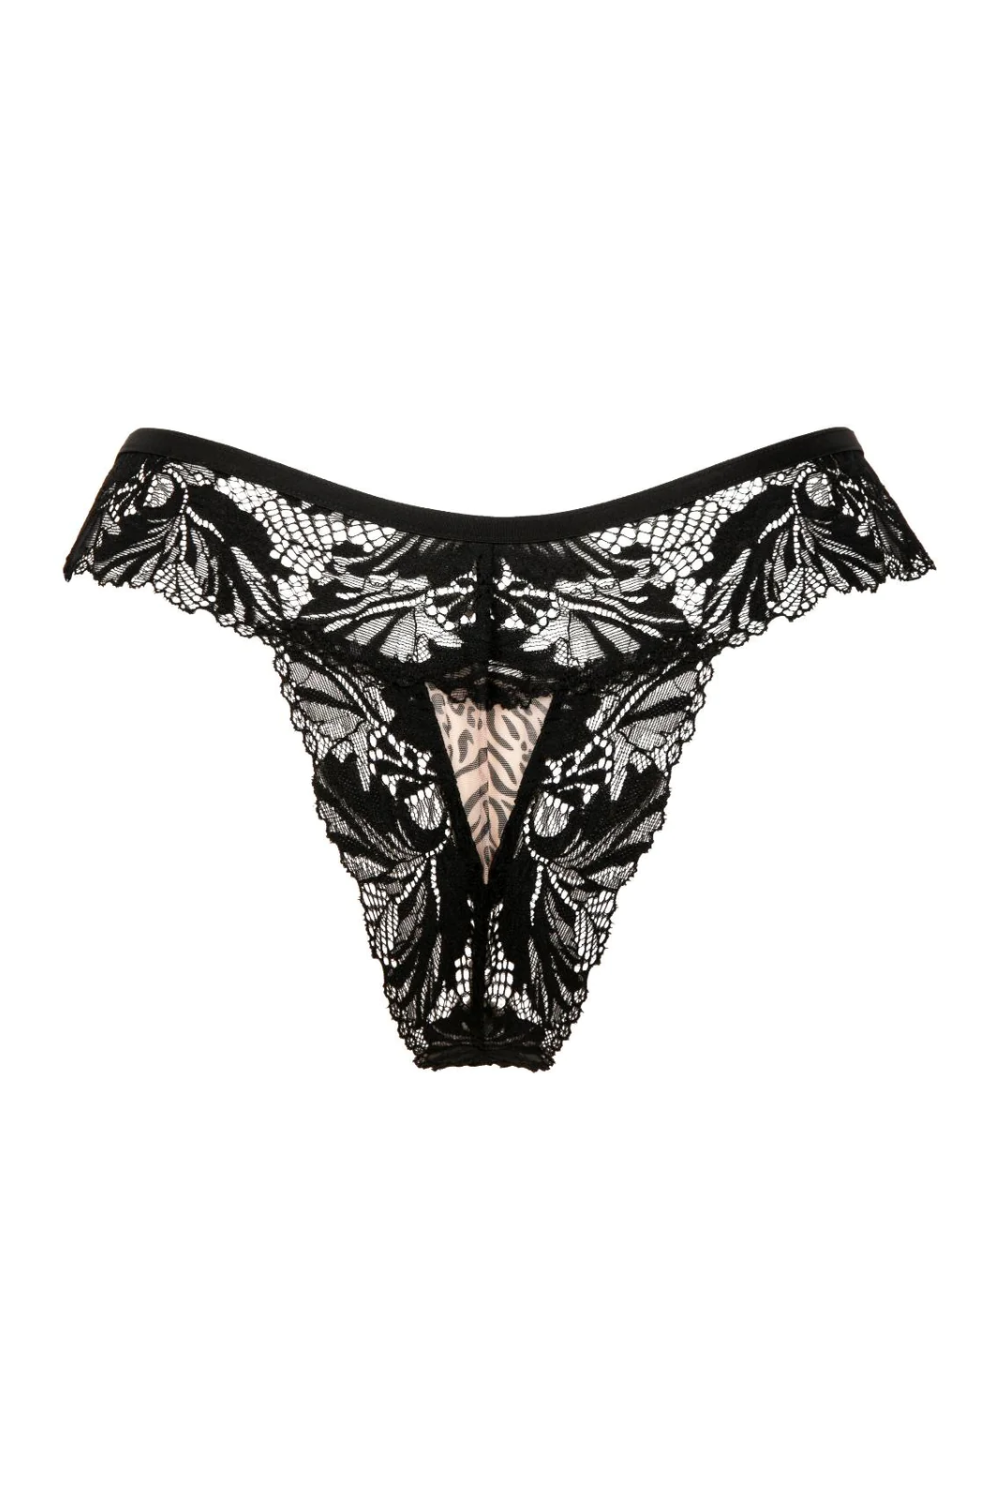 Caresse Féline Tropical Lace Animal Print Tulle Panty